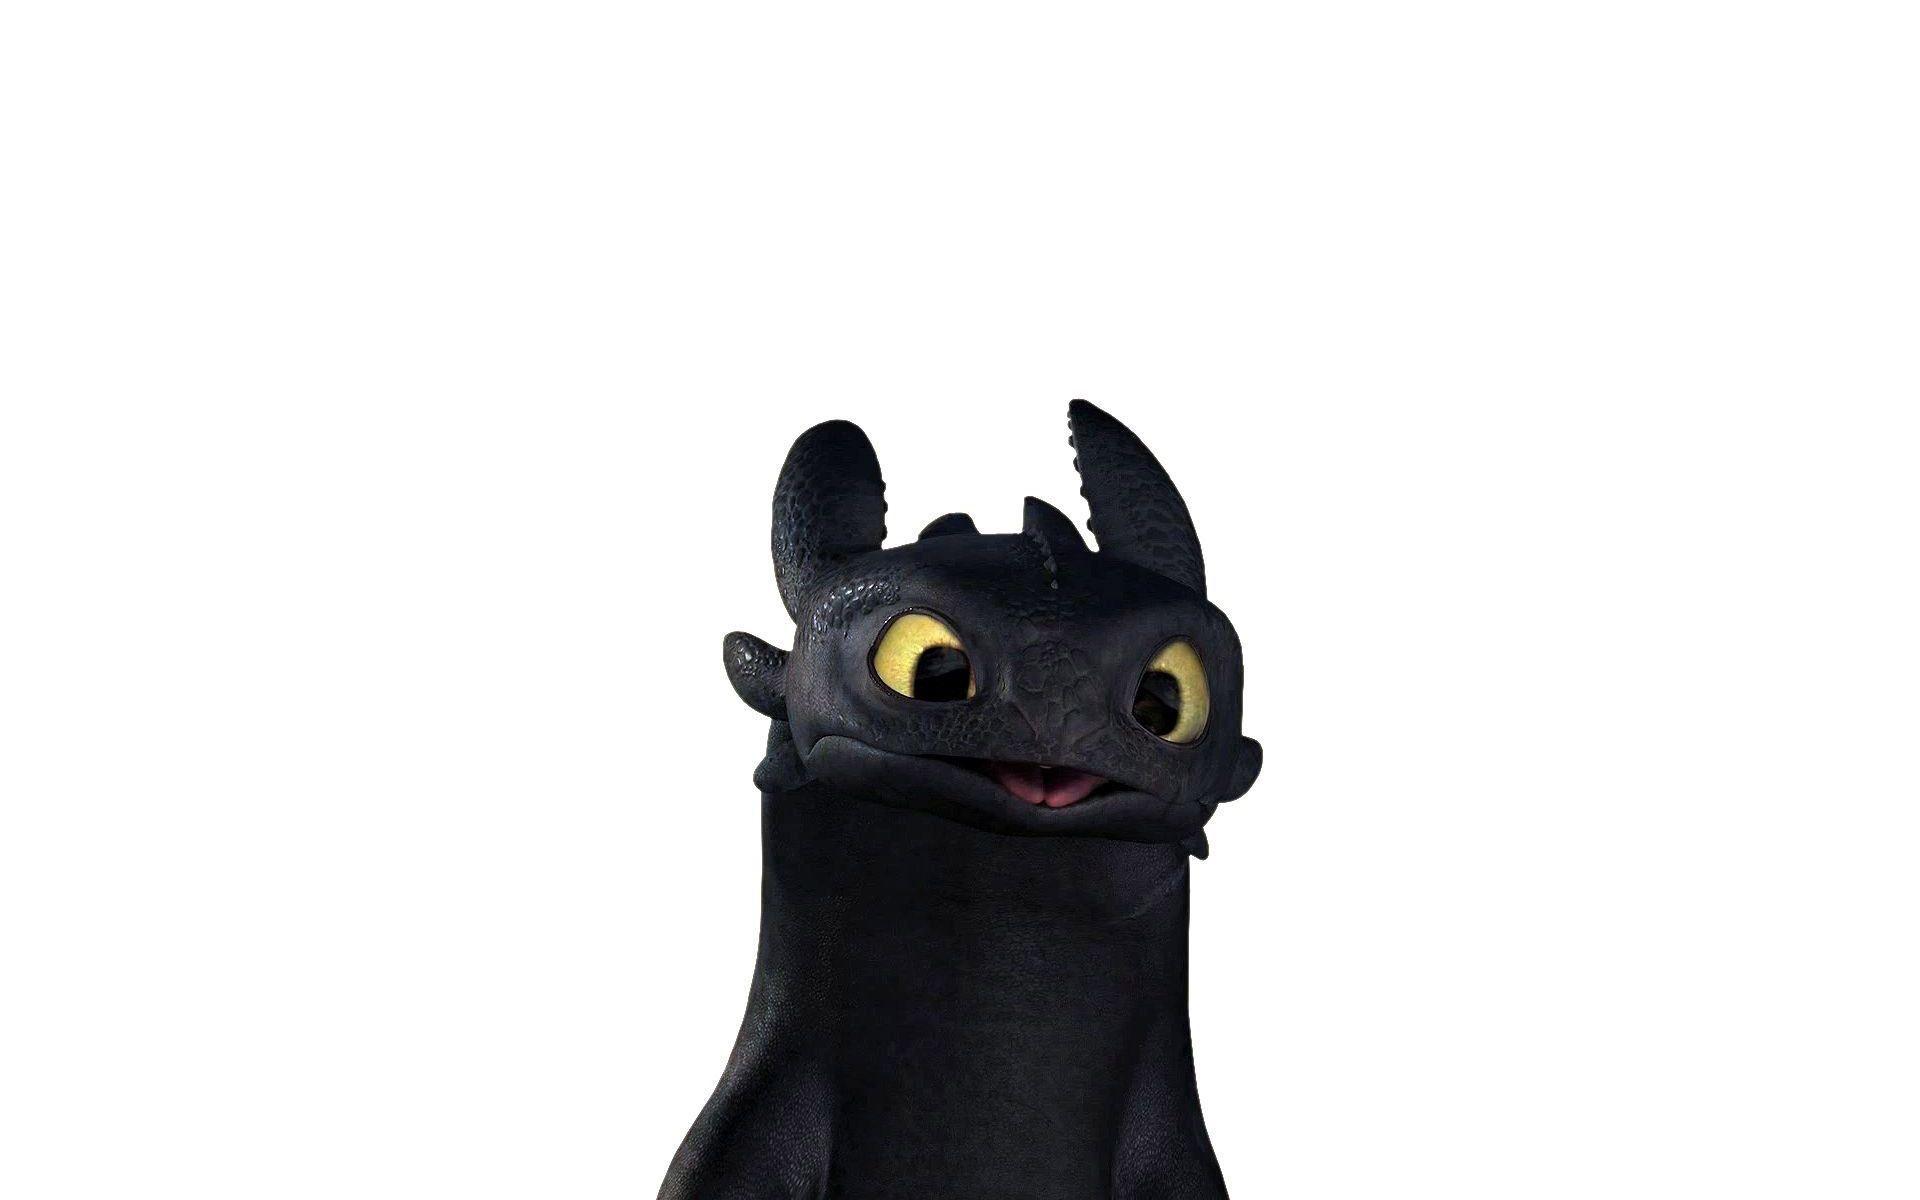 Toothless HD Wallpaper Free Download